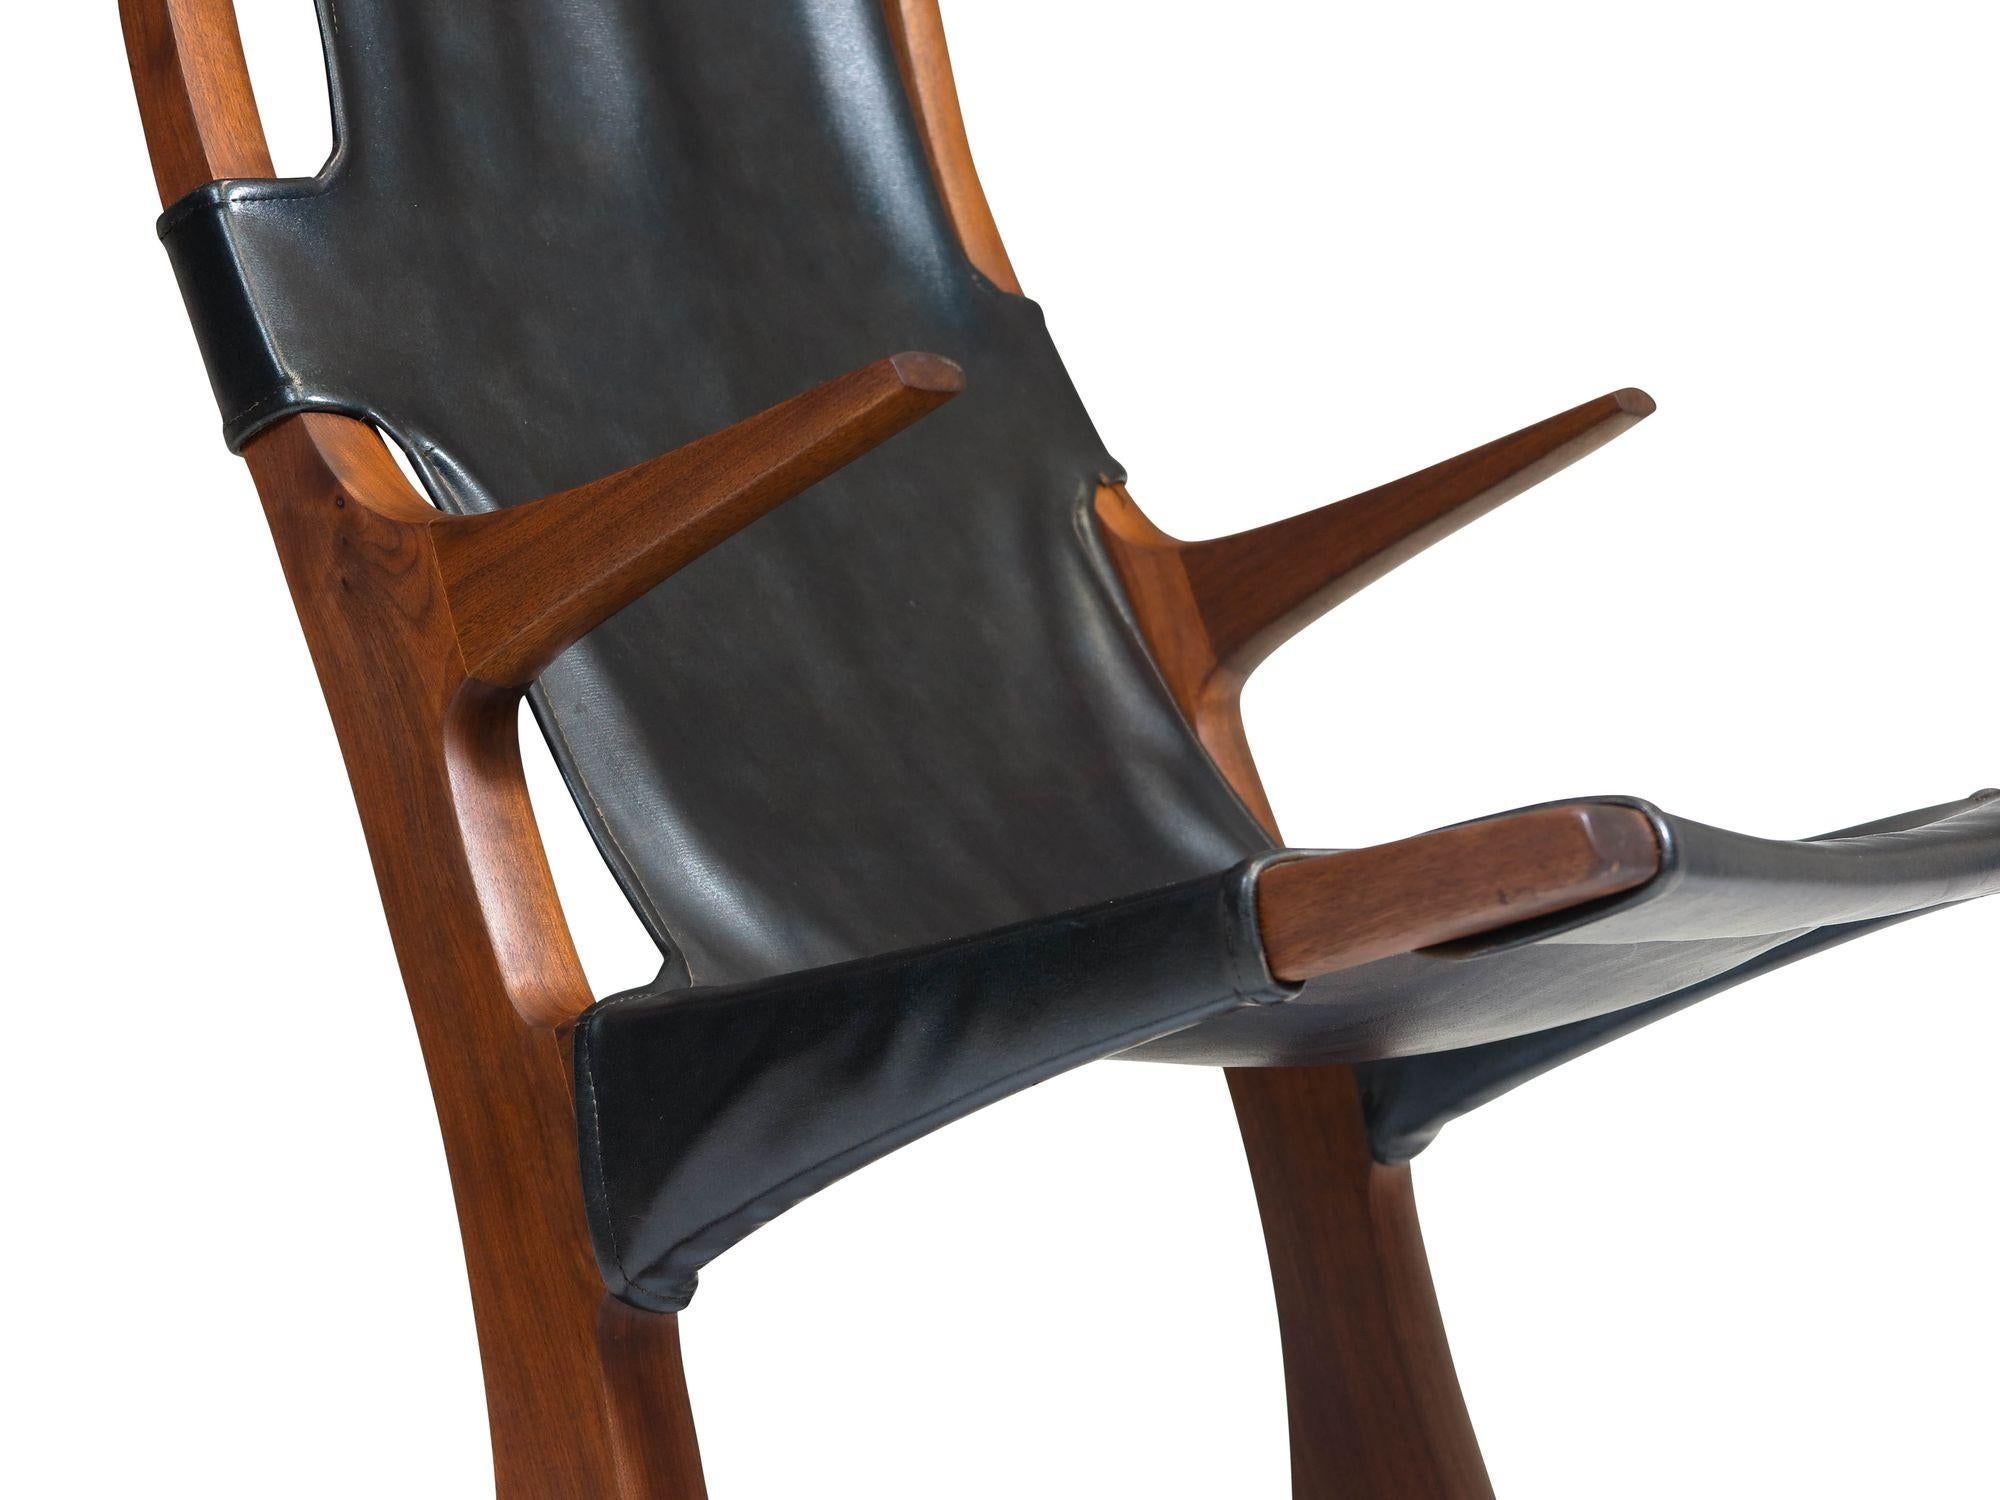 1970's California studio crafted rocking chair of solid black walnut with floating arms, and original black vinyl sling upholstery. Finely hand sculpted with exposed joinery, this stunning eye-catching piece blends artistry and